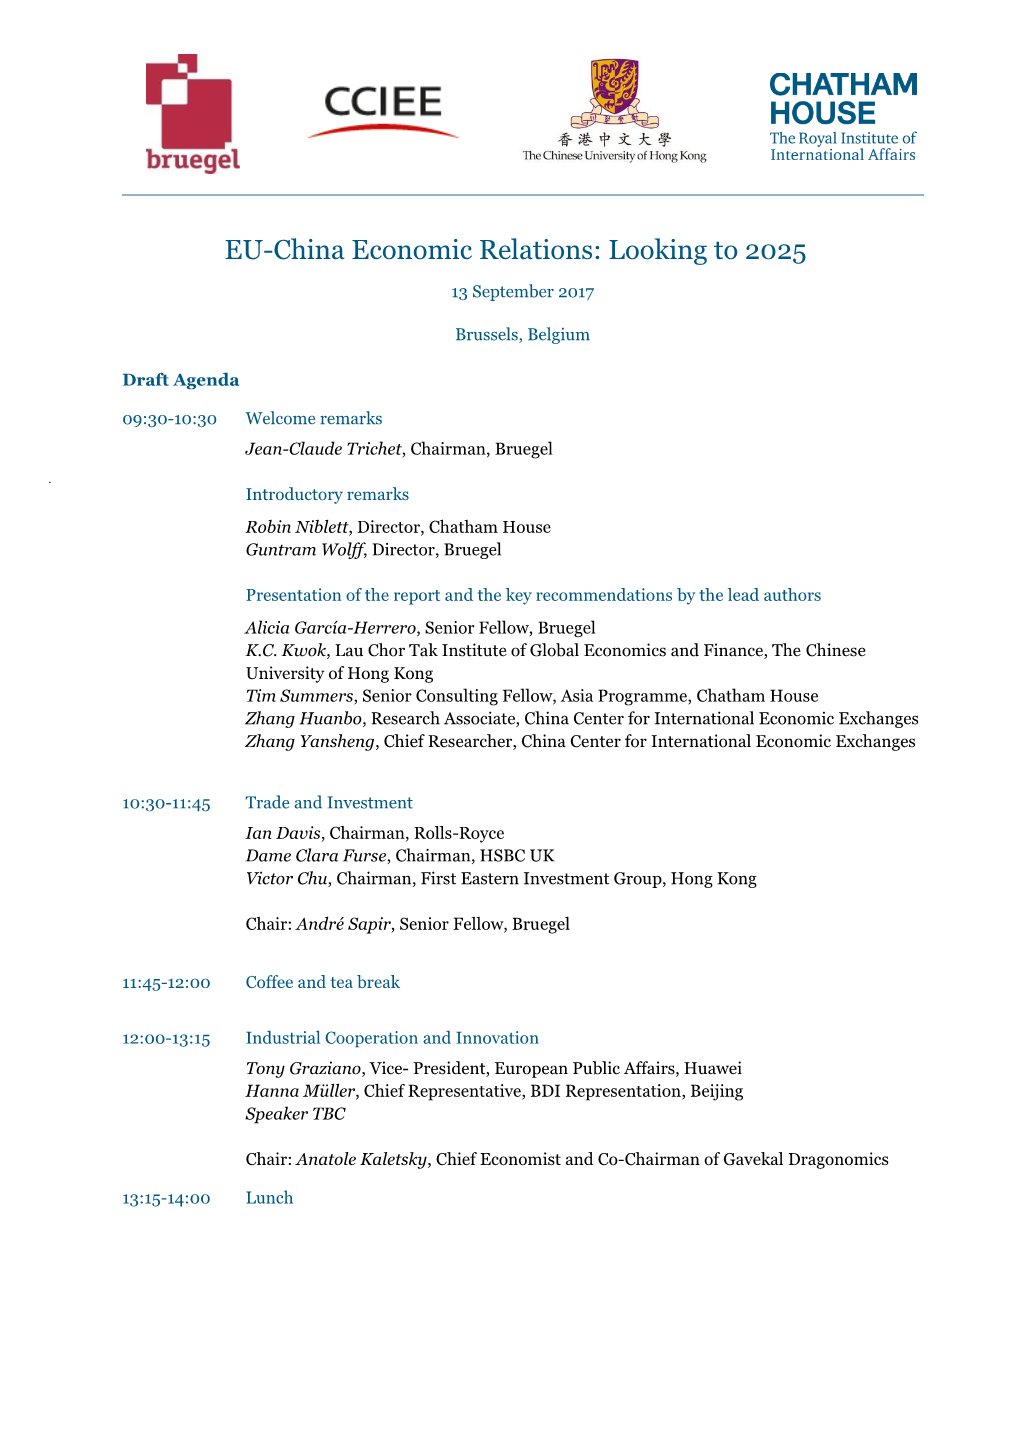 EU-China Economic Relations: Looking to 2025